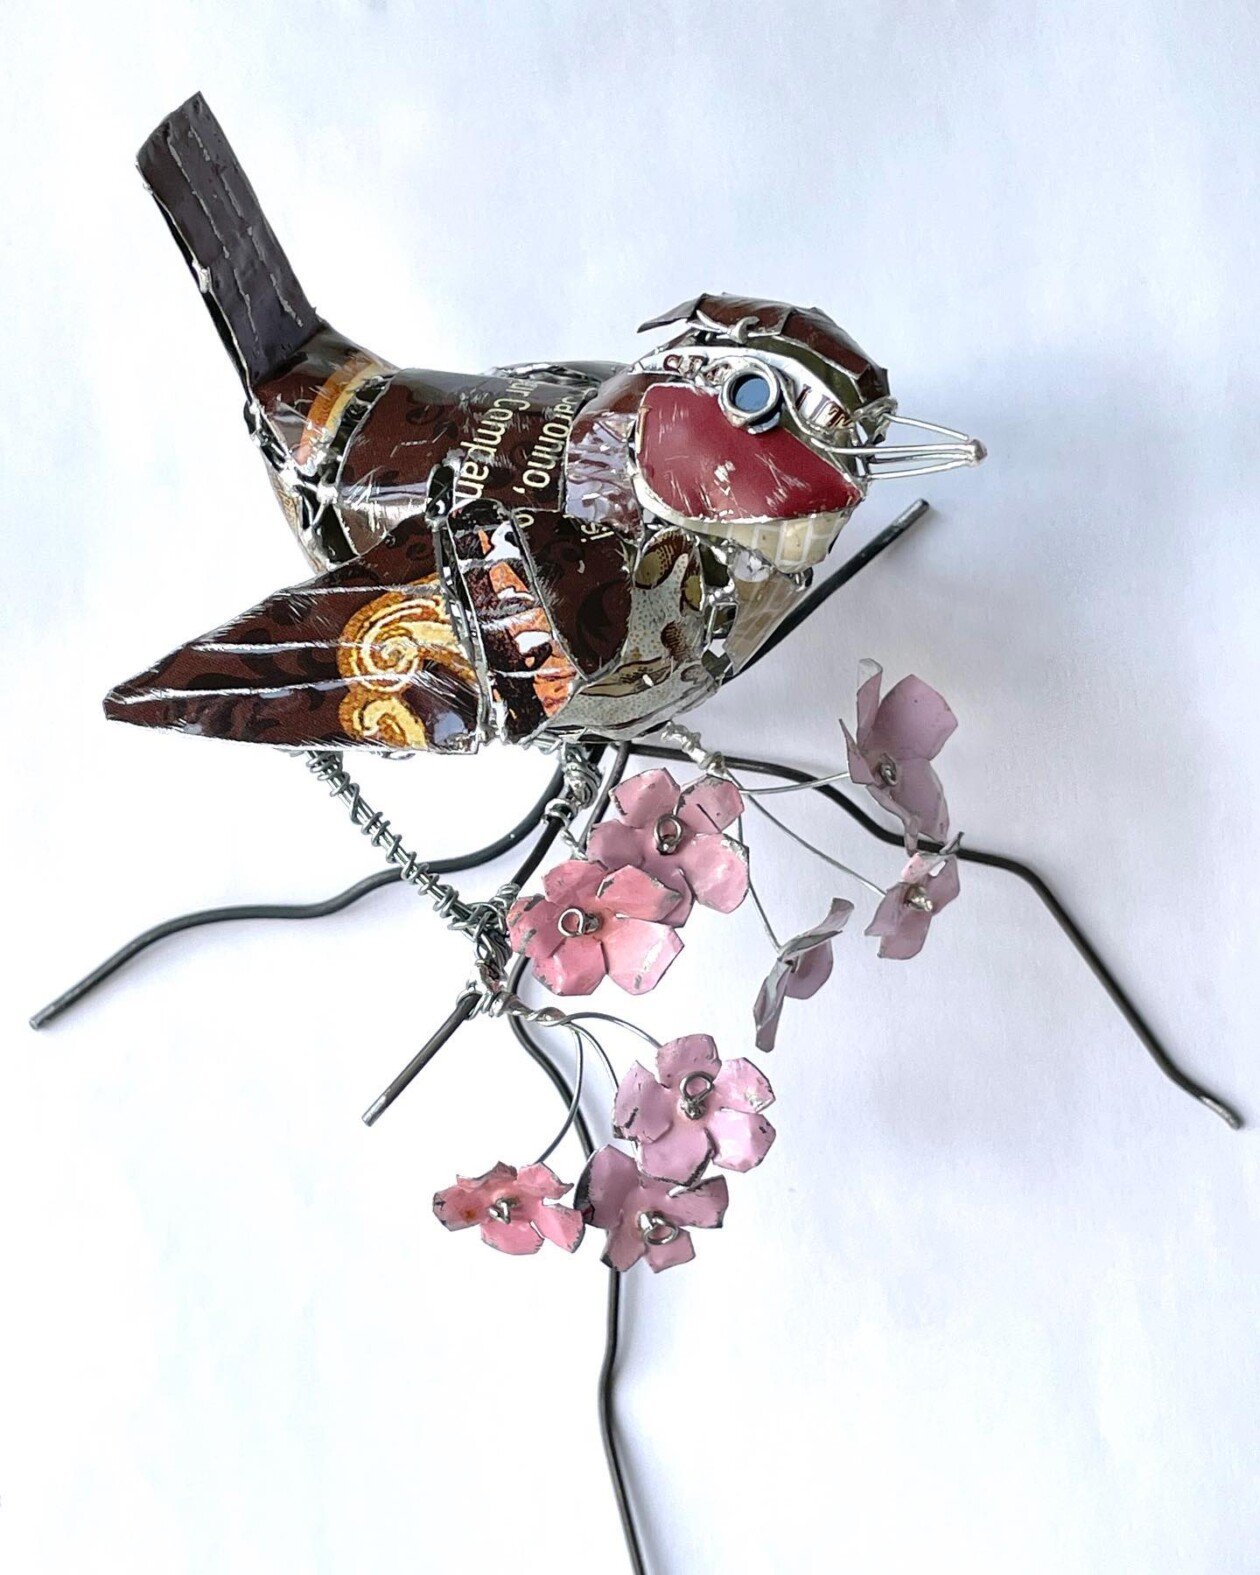 Bird Sculptures Made From Recycled Metal Scraps By Barbara Franc (14)